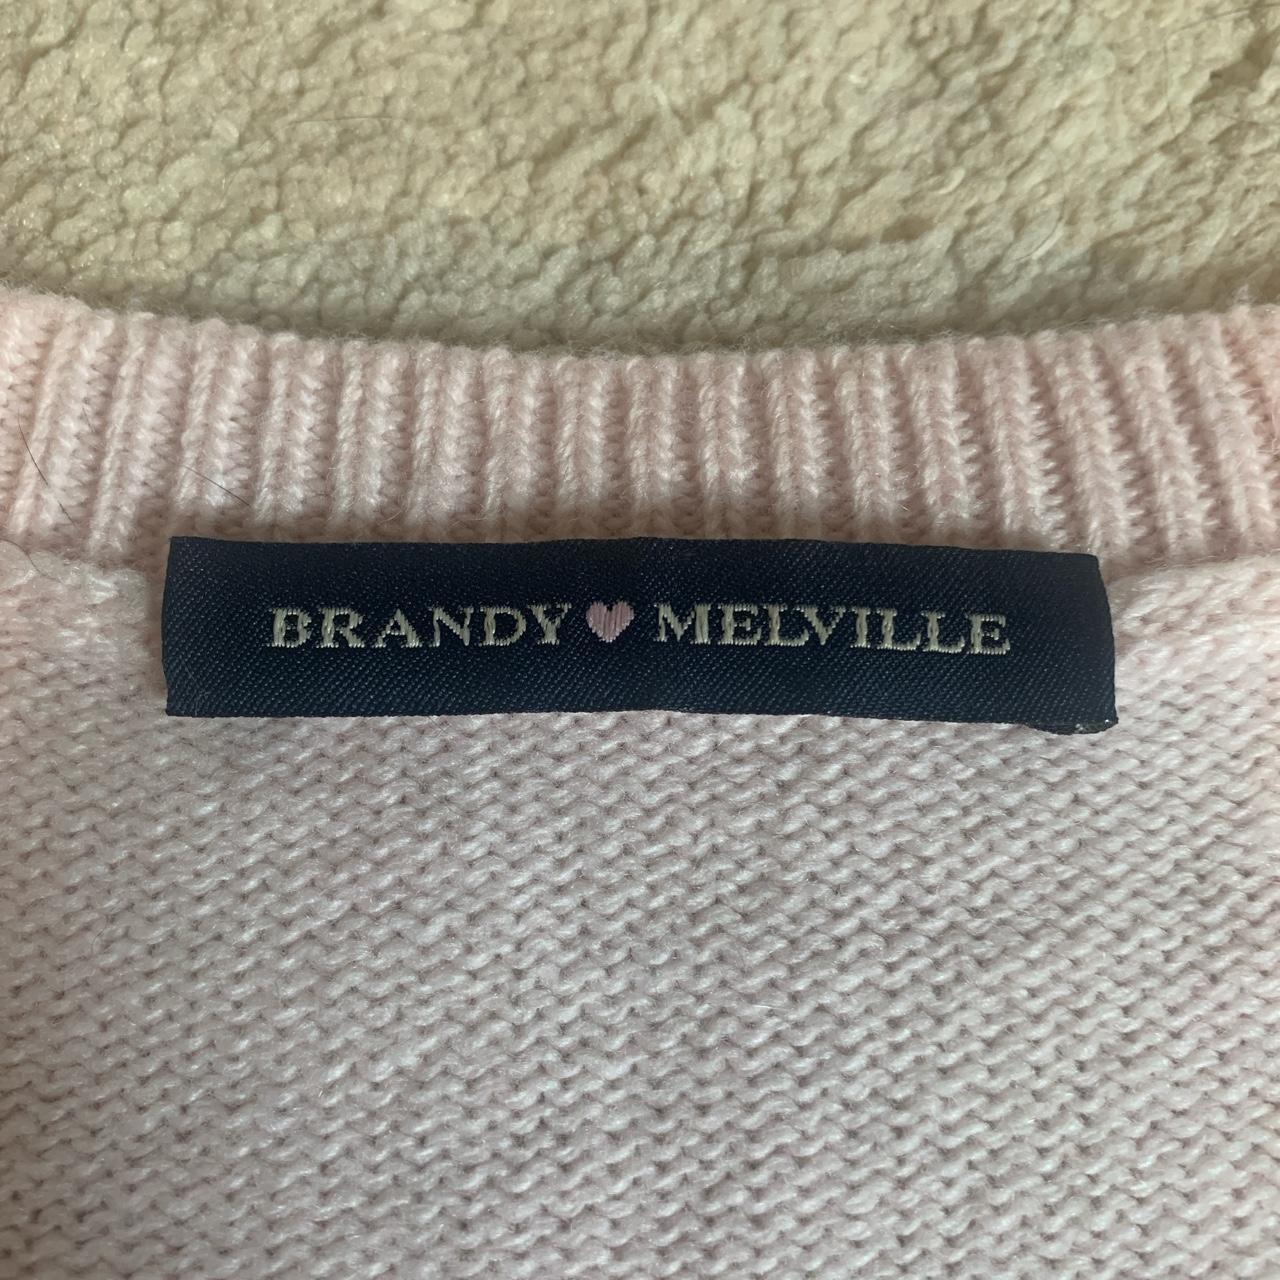 Brandy Melville Pink Sweatervest One size perfect... - Depop